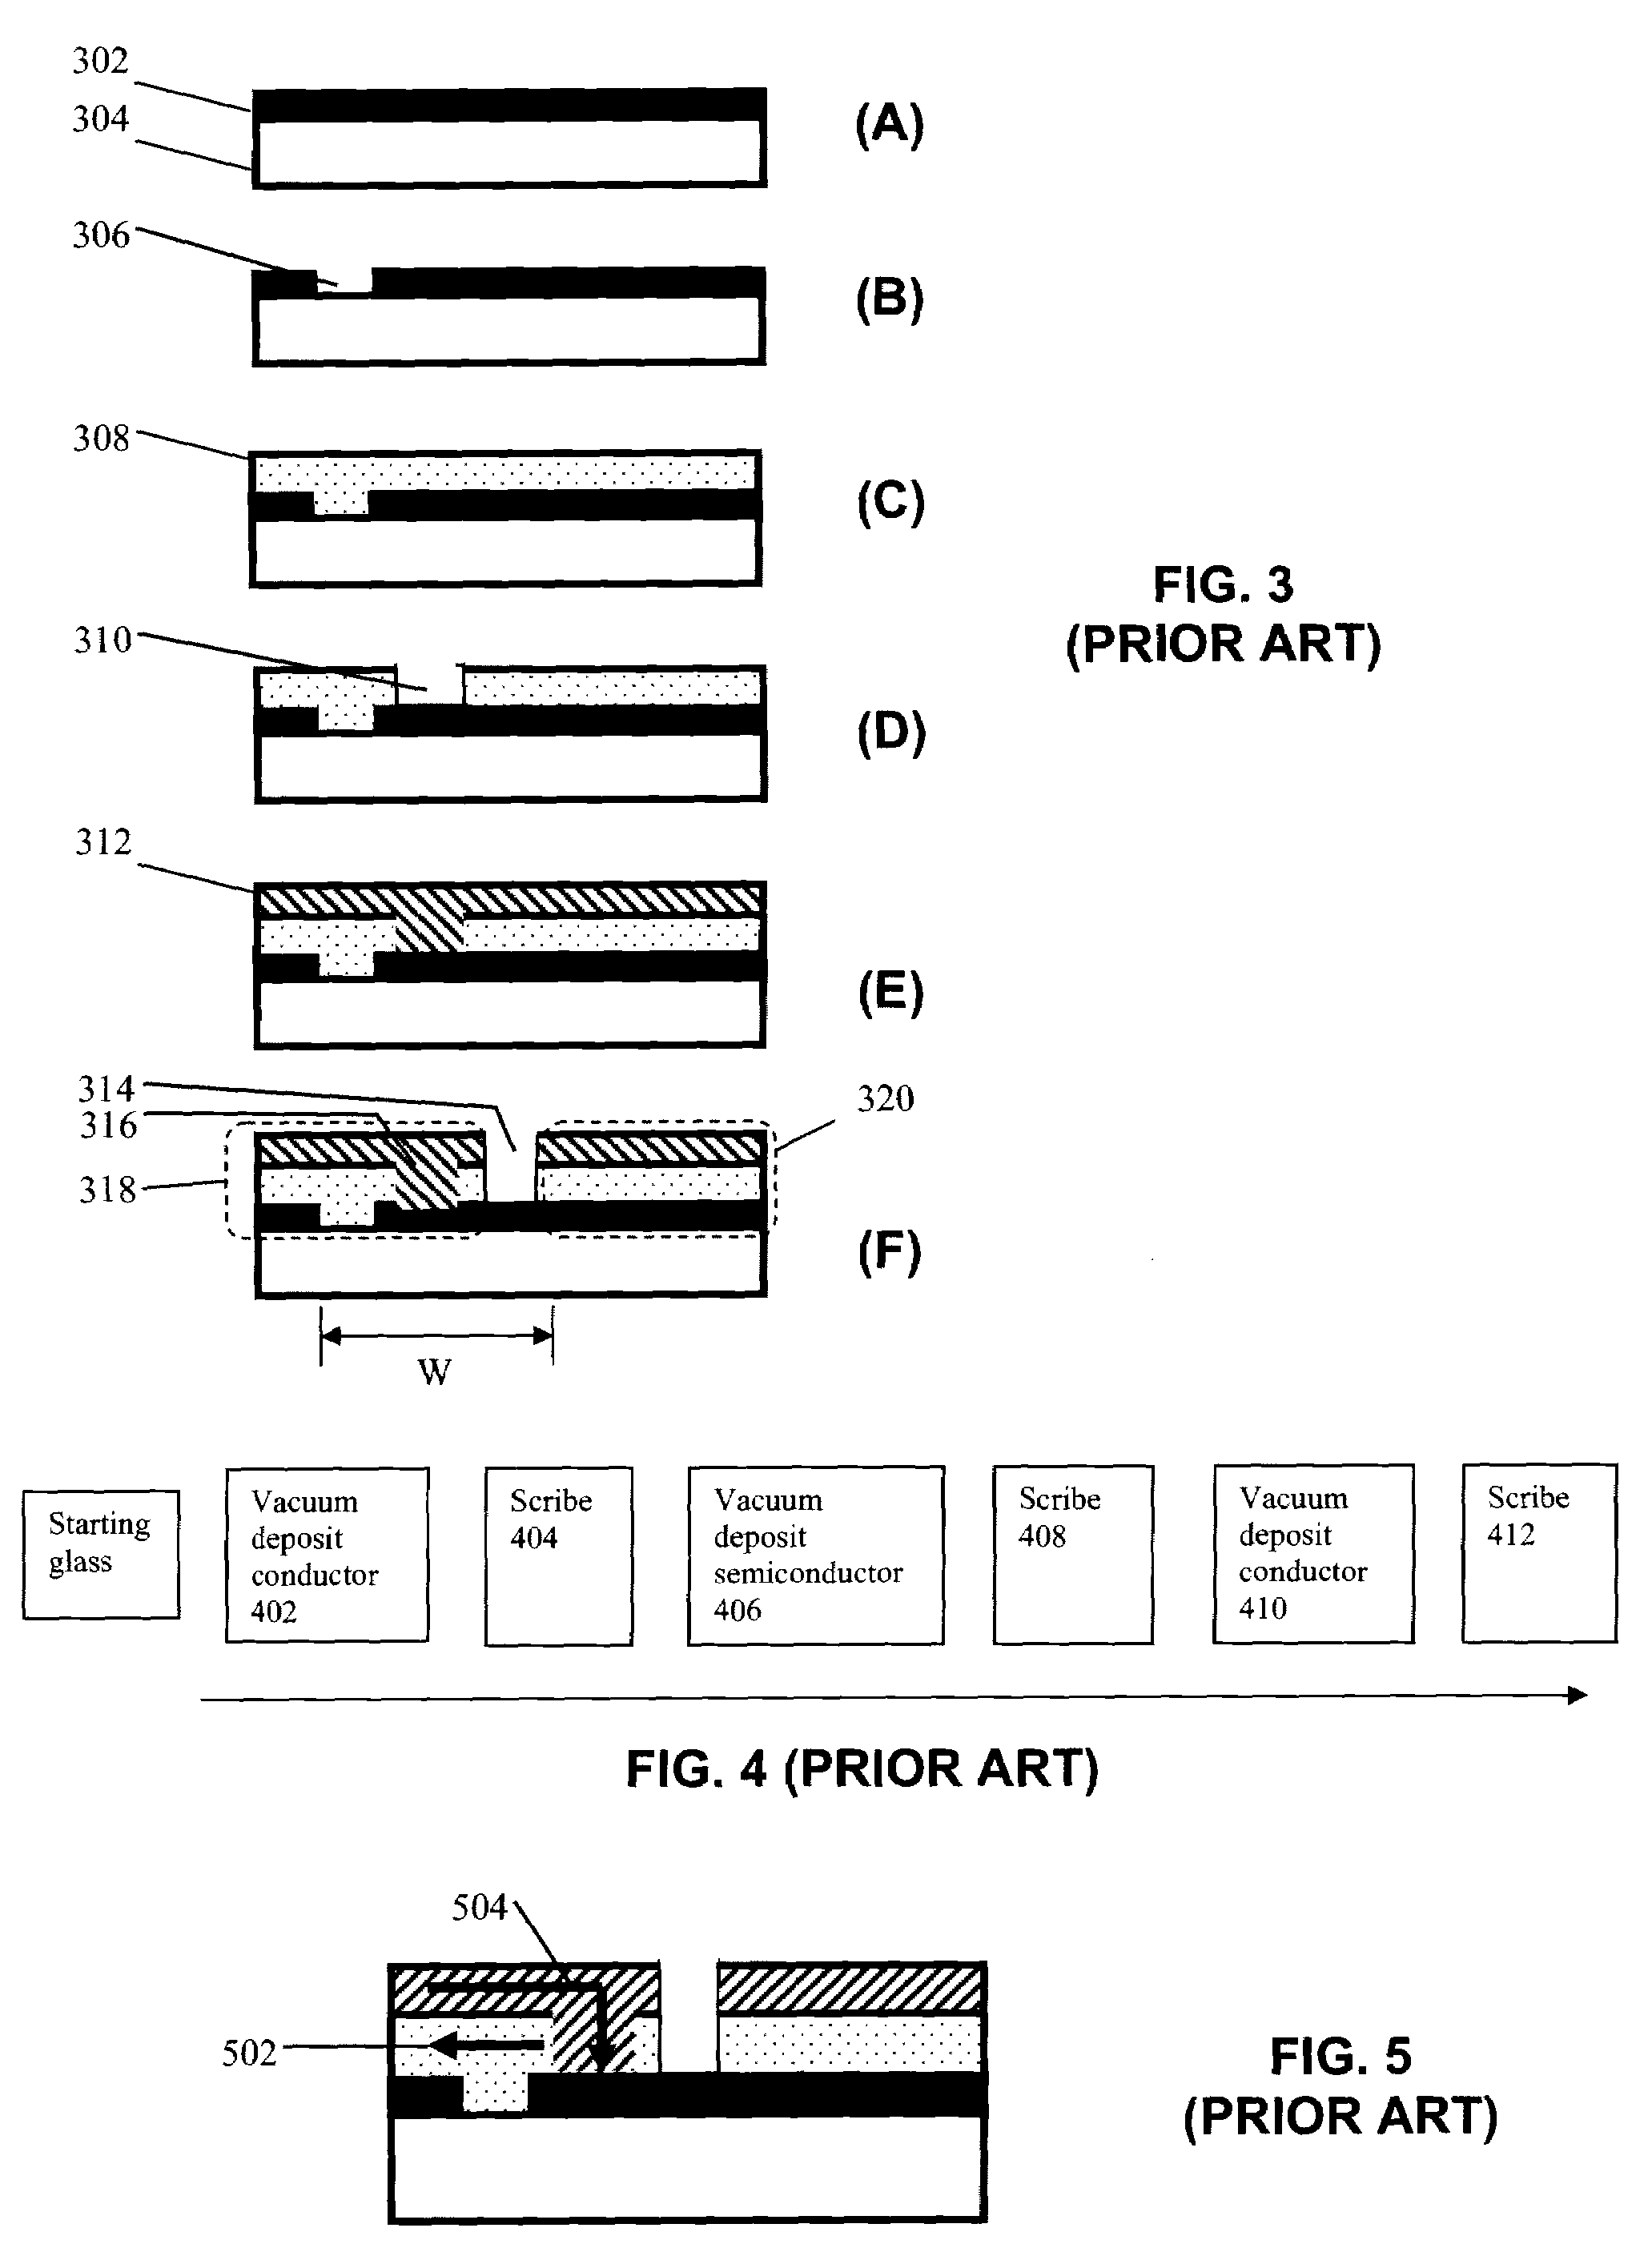 Module having an improved thin film solar cell interconnect